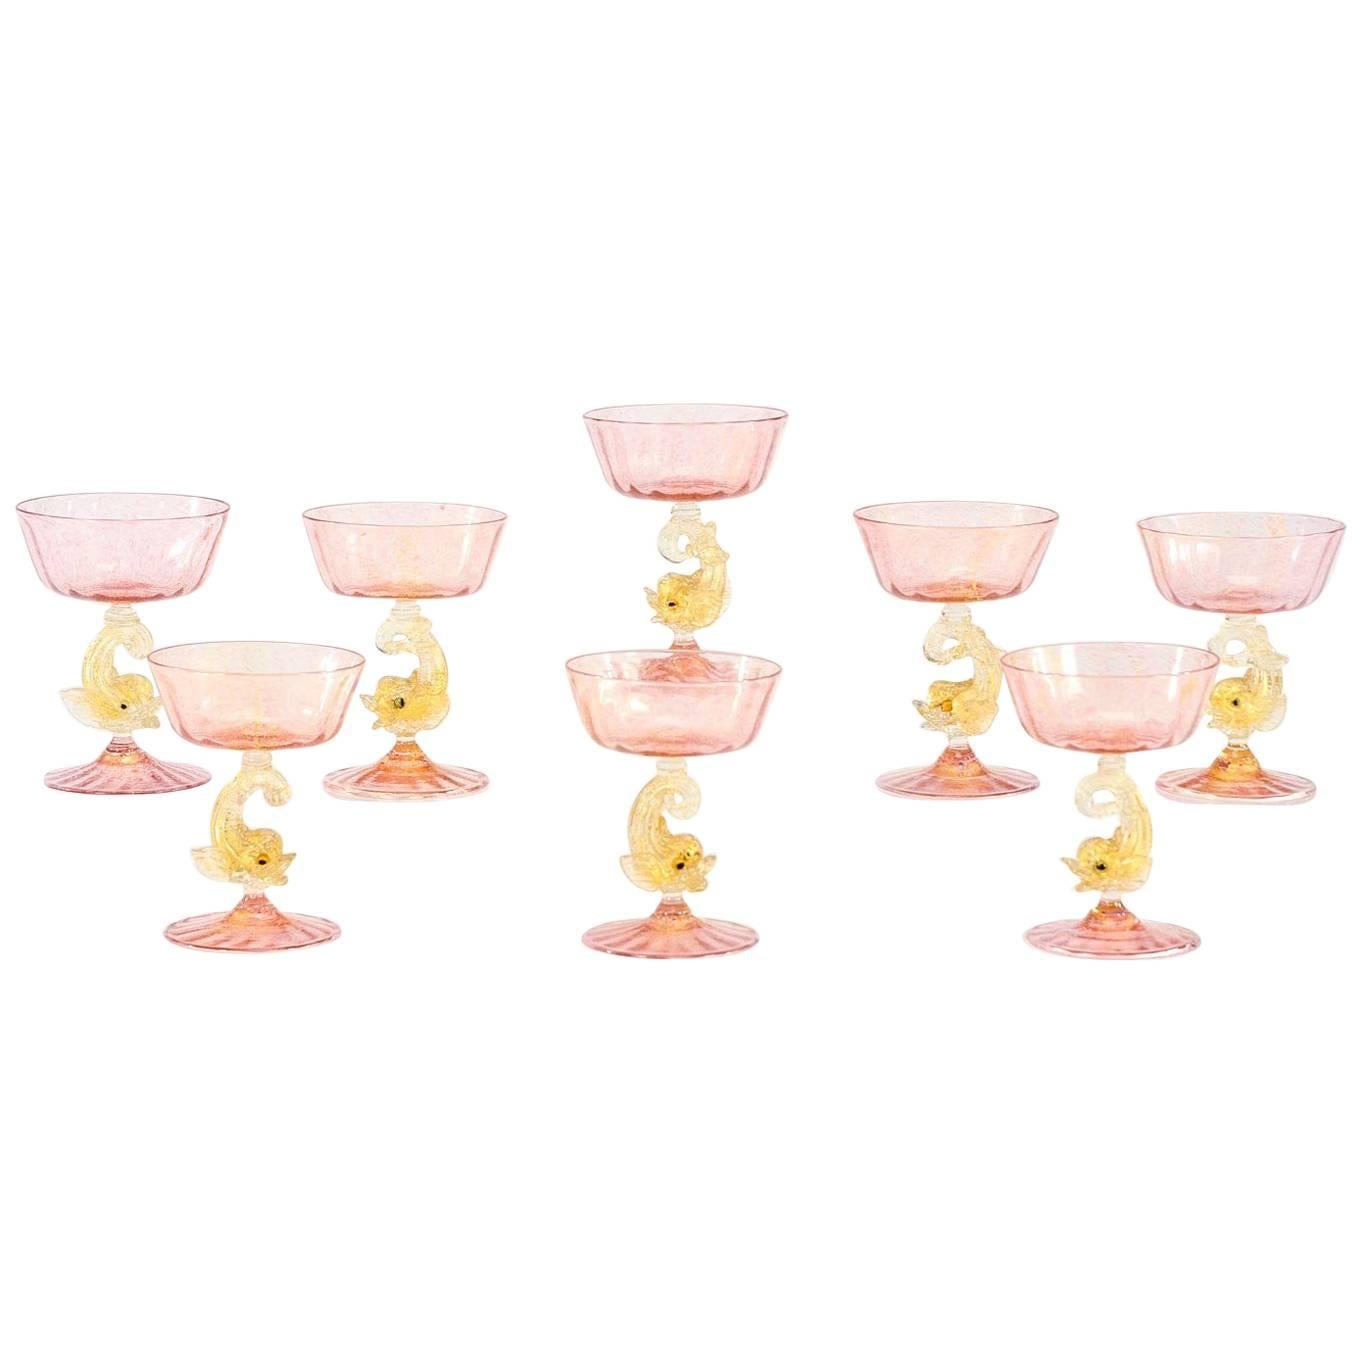 Eight Handblown Venetian/Murano Pink Rose Champagne Coupes with Figural Dolphins